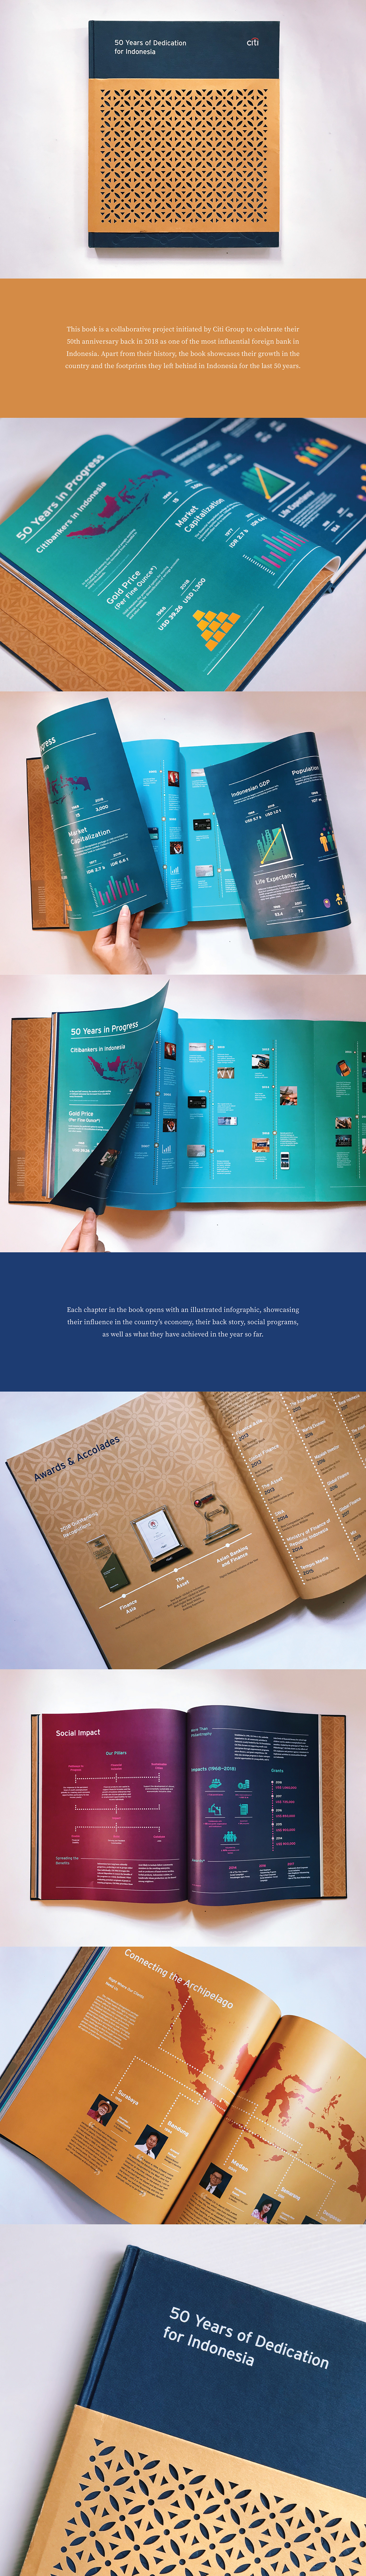 book anniversary coffee table corporate infographic chart book design Layout Book Layout indonesia